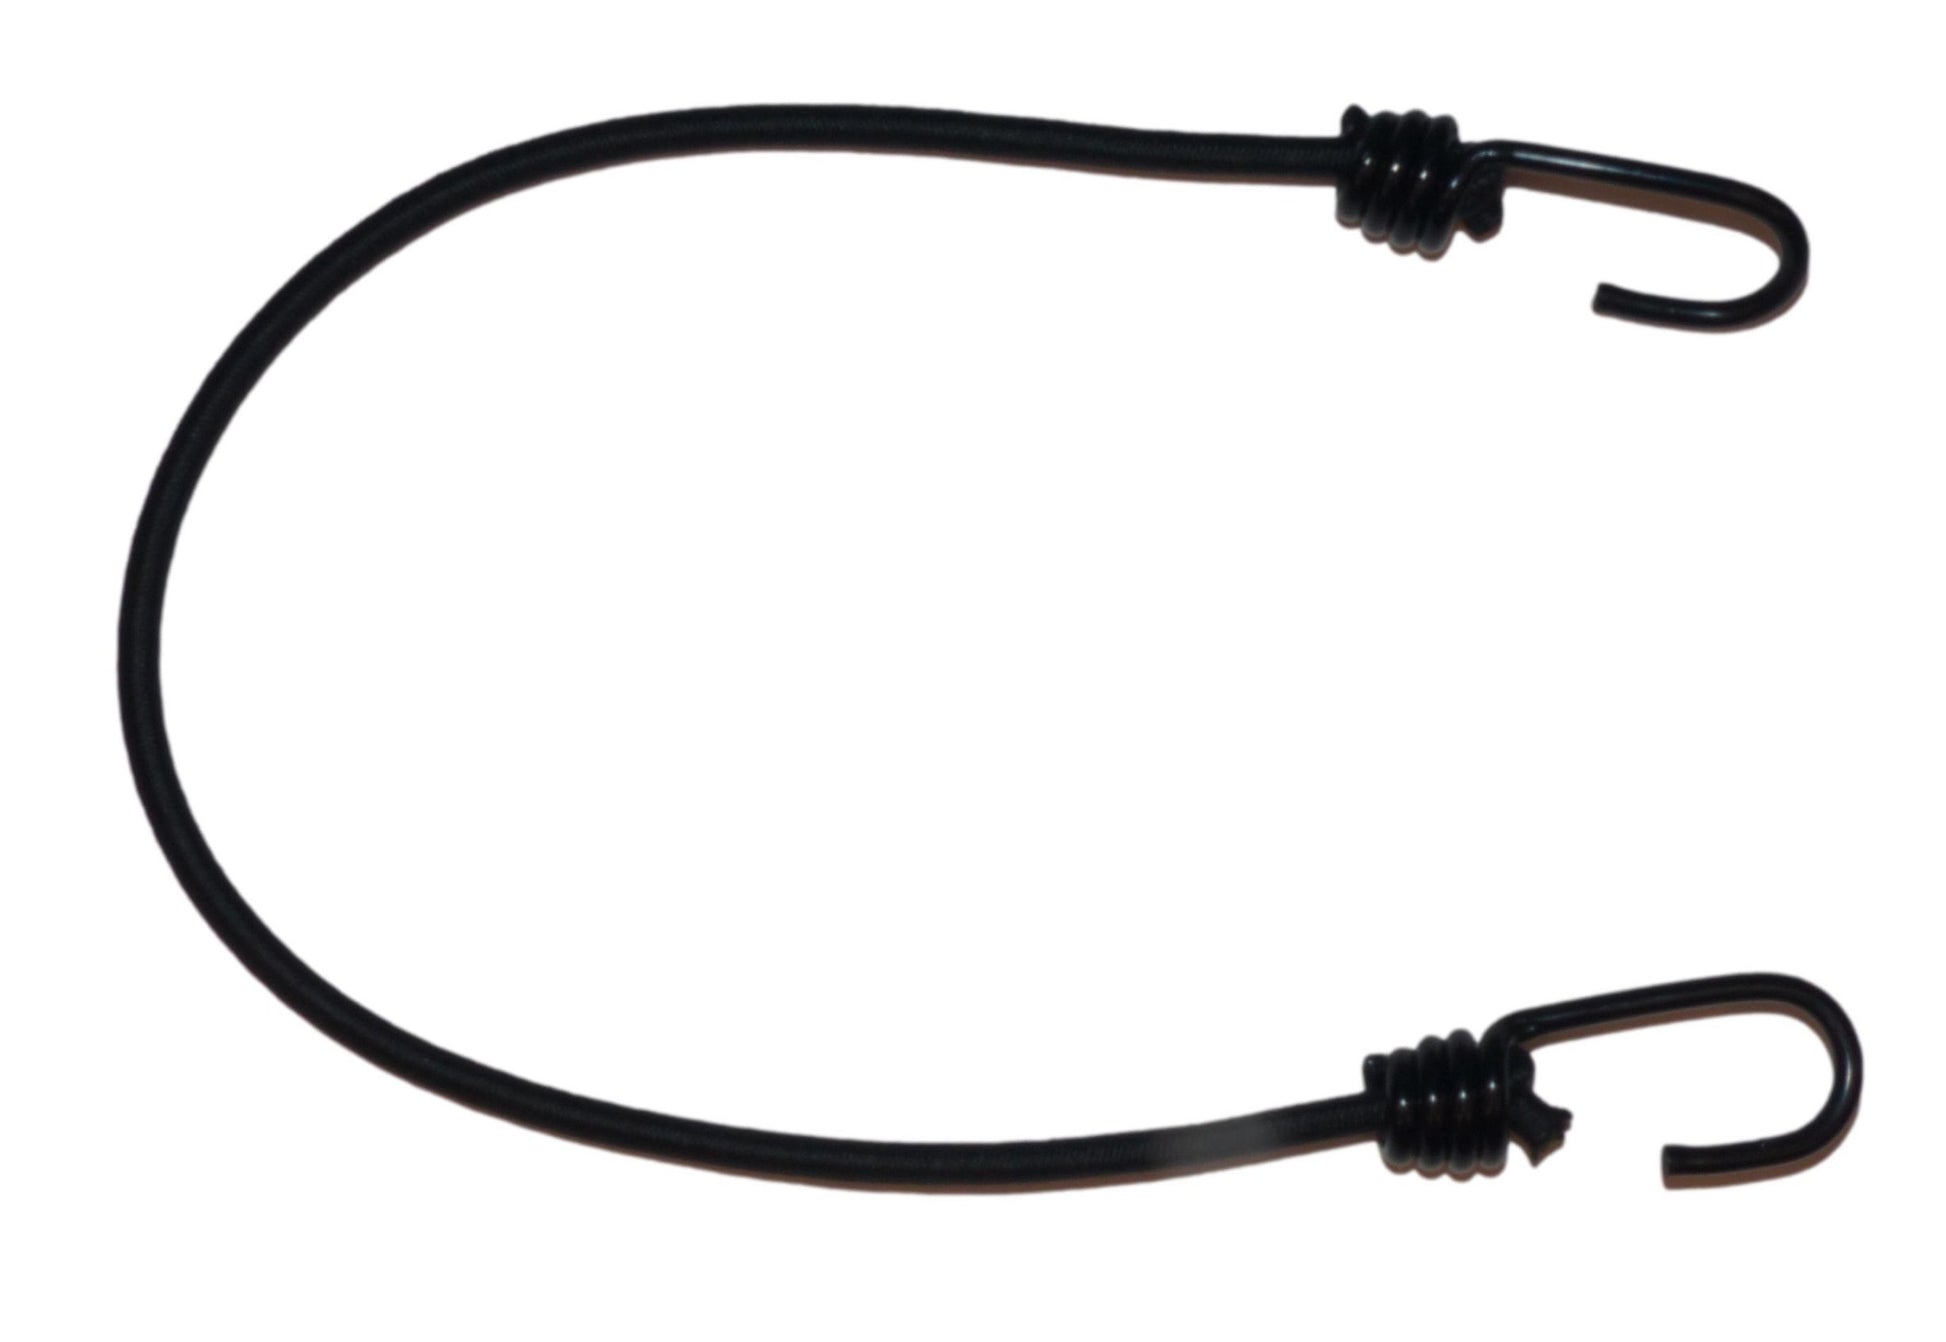 6mm shock cord strap with plastic-coated metal hooks